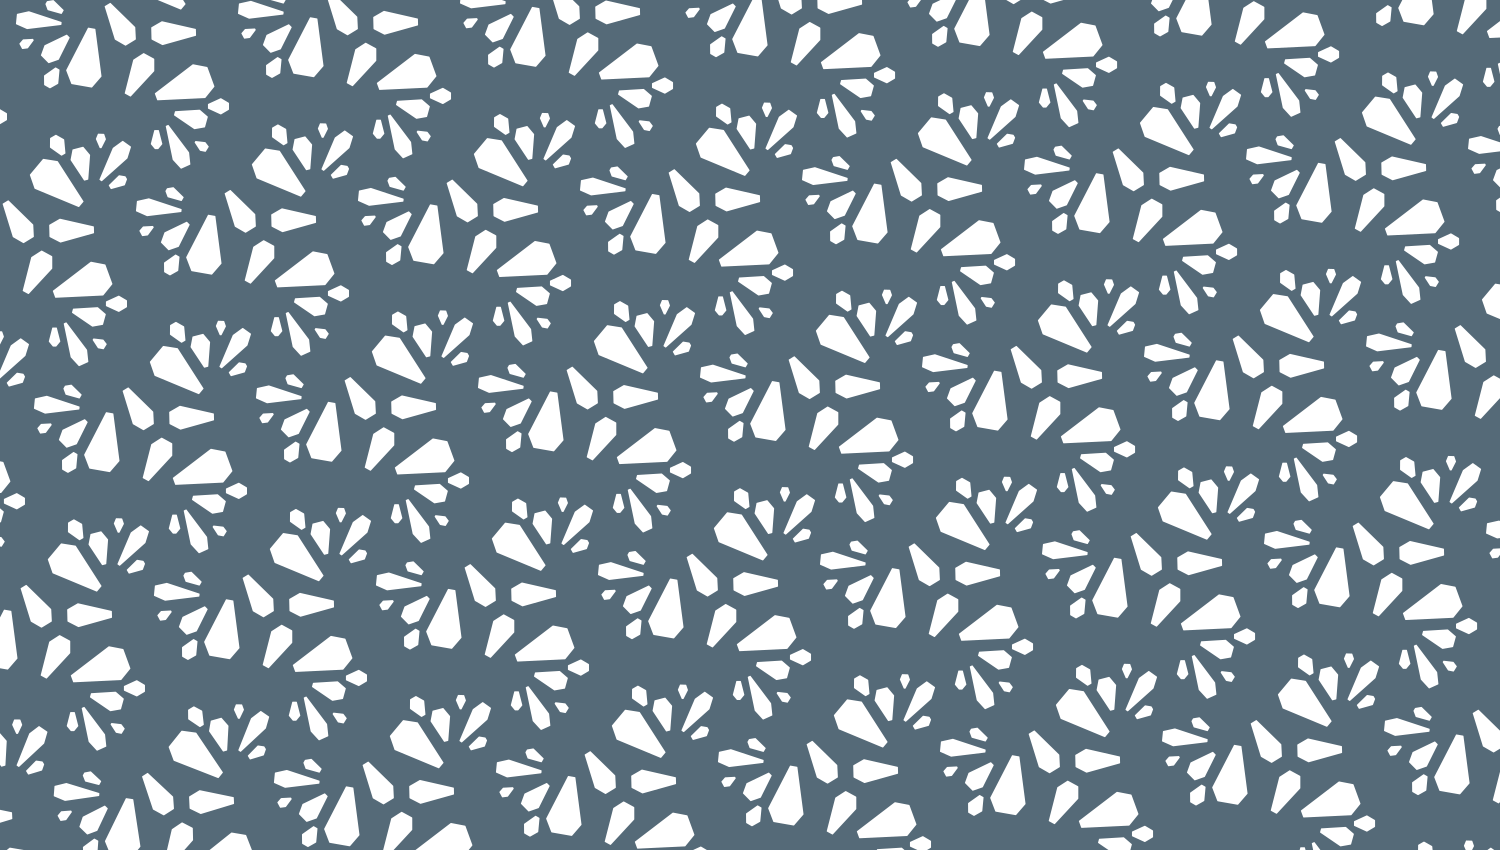 Parasoleil™ Antwerp© pattern displayed with a blue color overlay